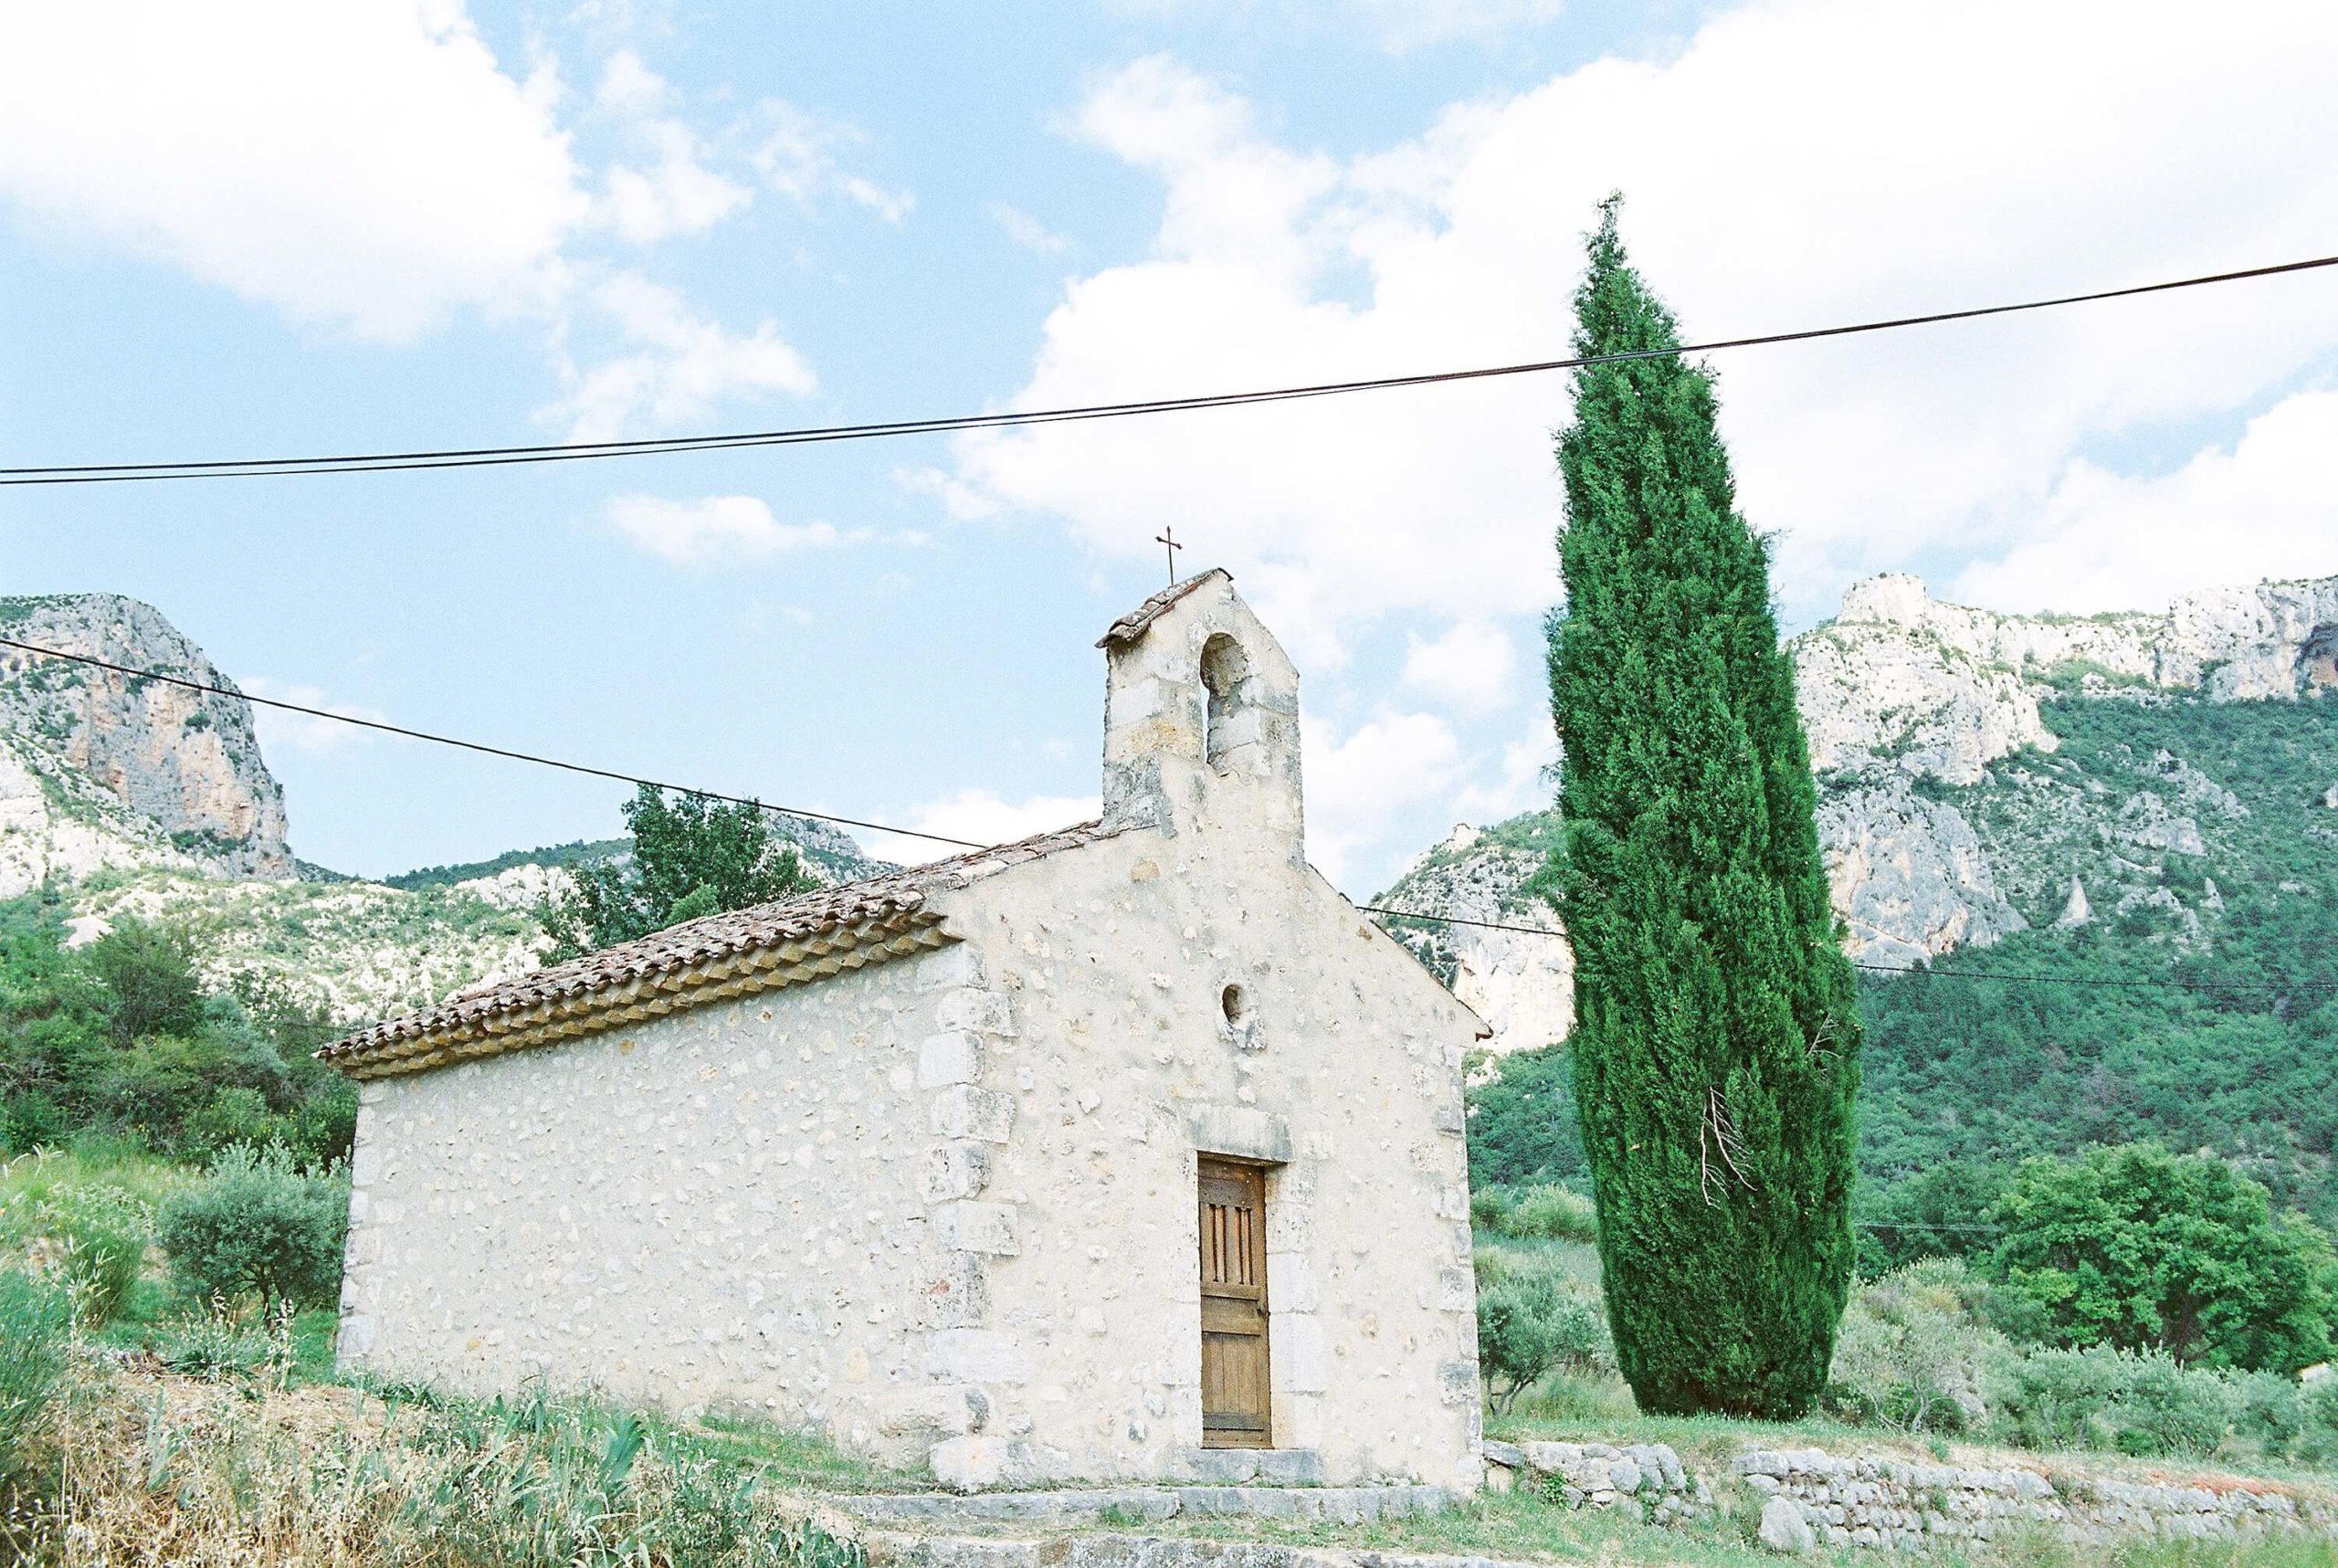 things to do in provence france: drive through the Verdon mountain range. image of a old, quaint stone church in the mountains.